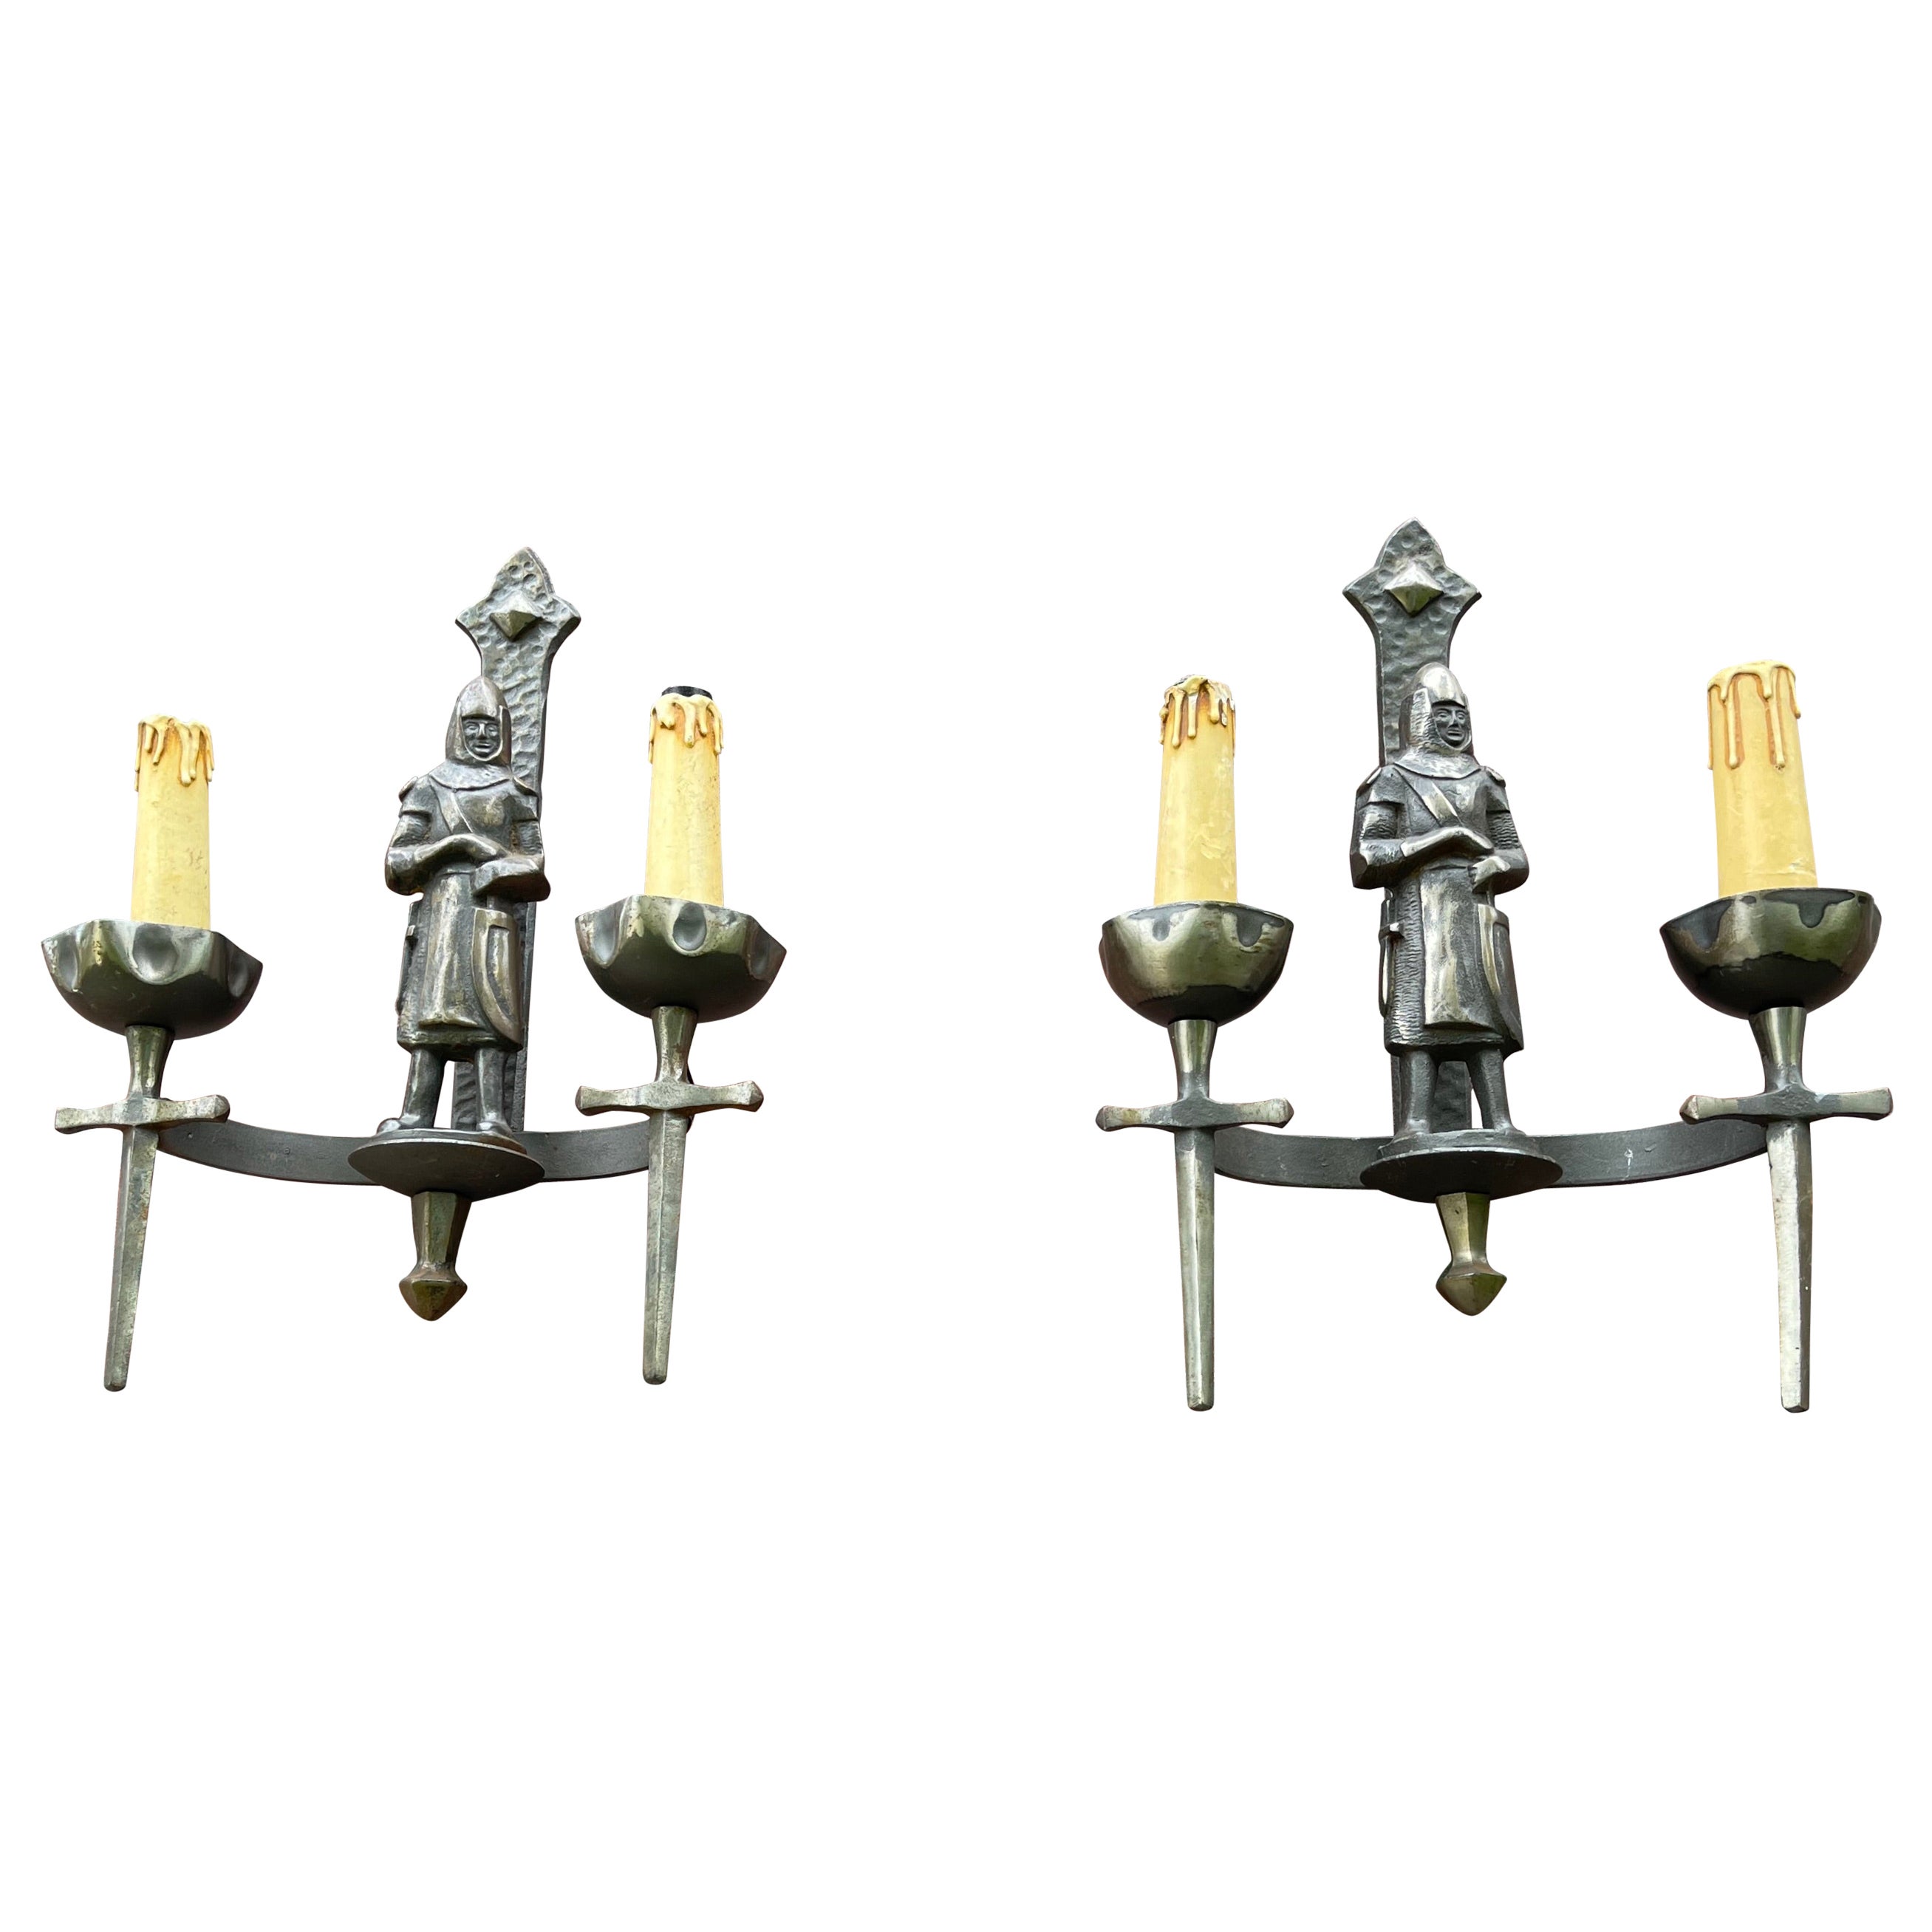 Rare Pair of Two-Light Gothic Revival Bronzed Knight with Swords Wall Sconces